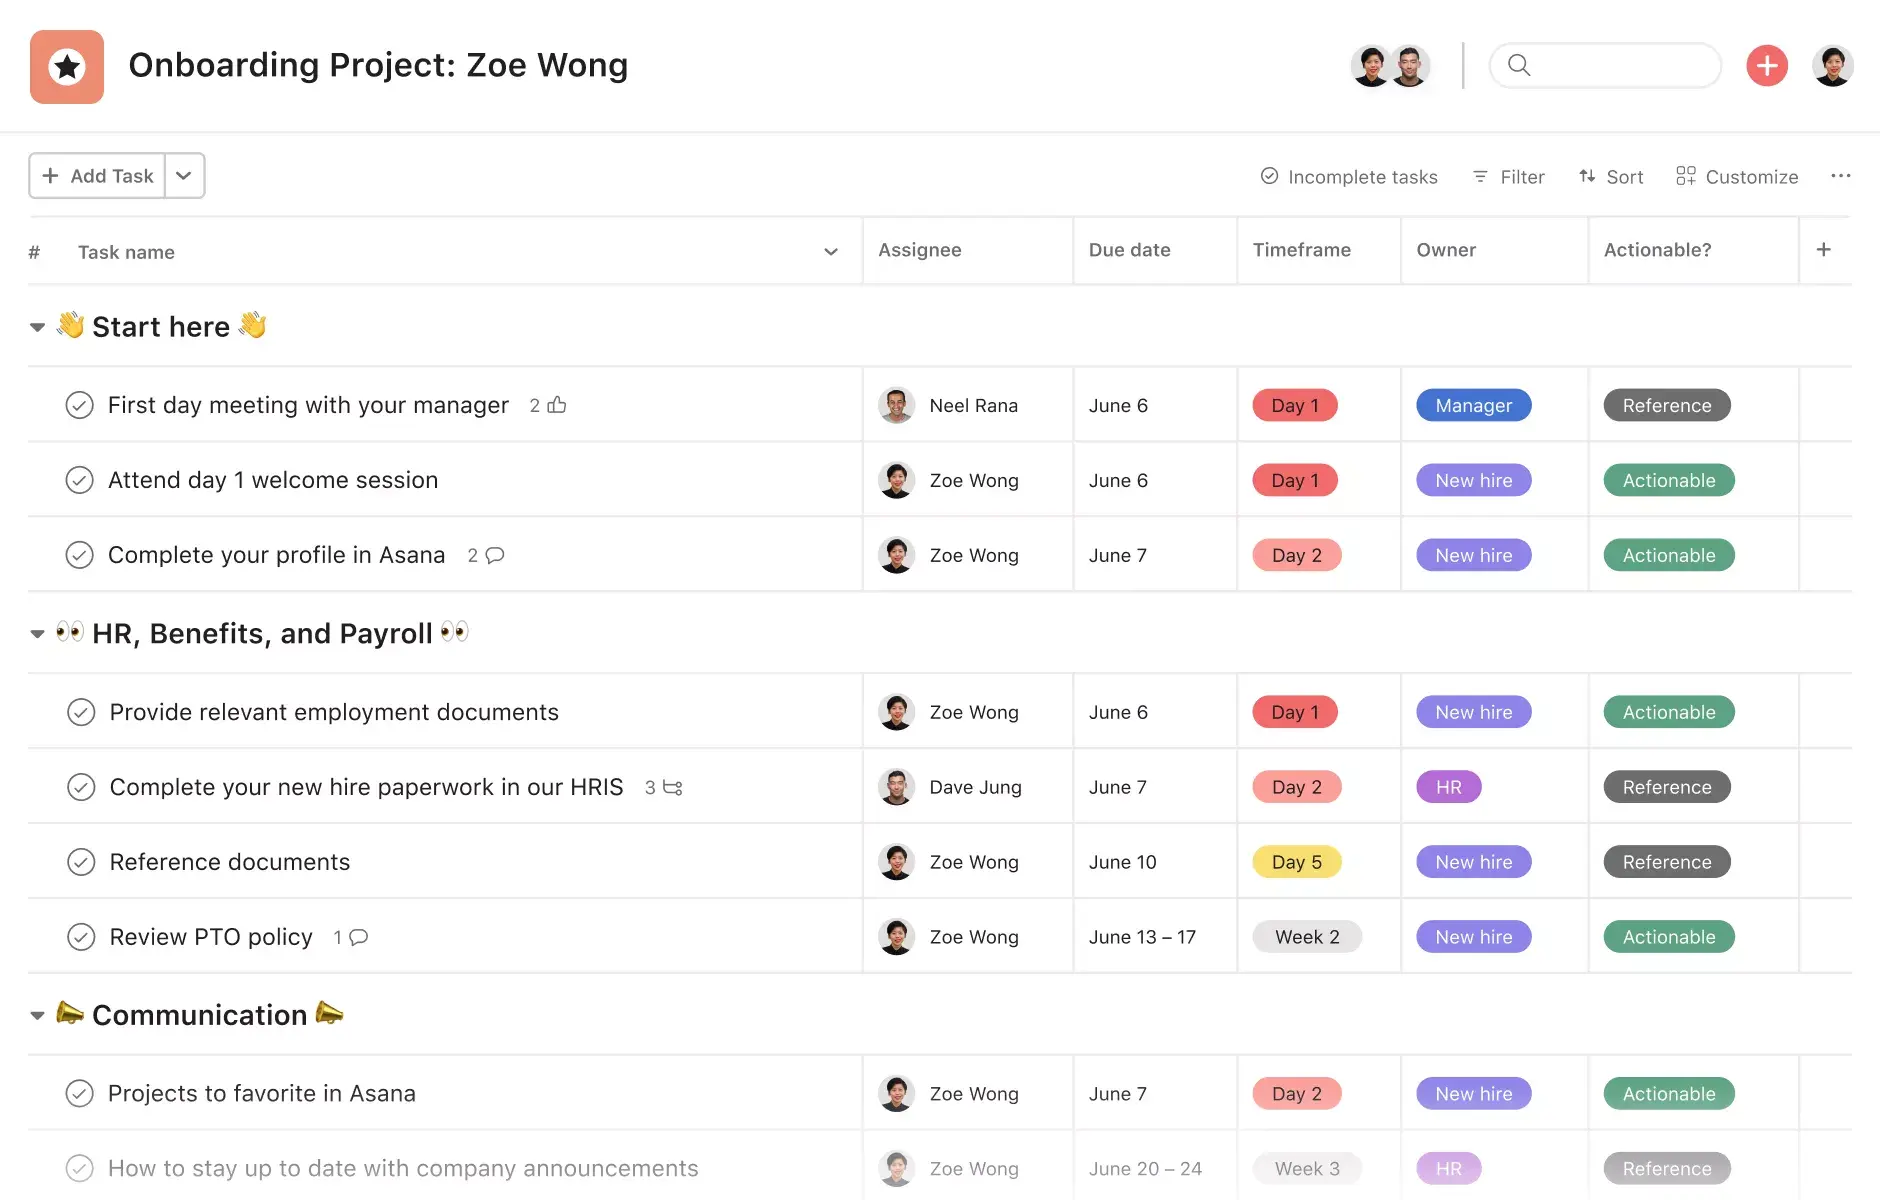 [Product UI] New employee onboarding project in Asana, spreadsheet-style list view (Lists)